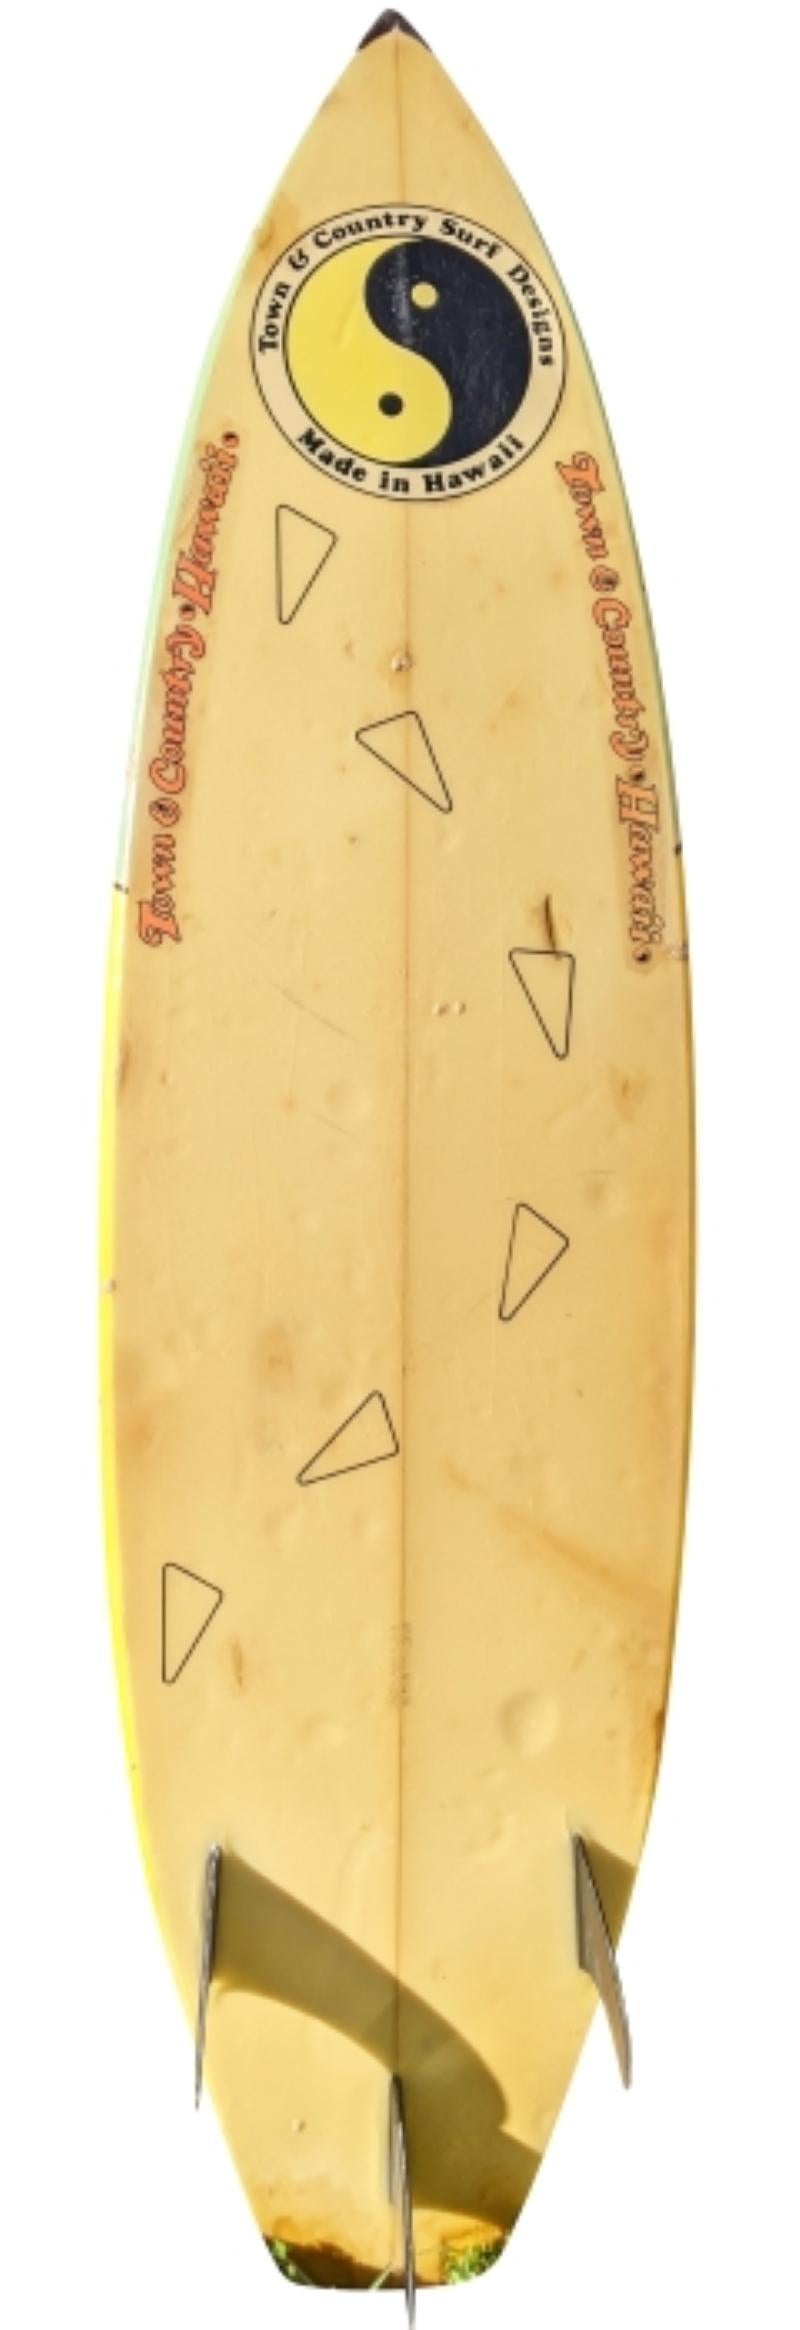 1987 Town & Country Surfboards (T&C) shaped by the late Ben Aipa (1942-2021). Features a iconic 1980s style airbrushed art design with glassed on thruster (tri-fin) setup. Signed “Ben Aipa Hawaii” on the deck. A great example of an airbrushed T&C